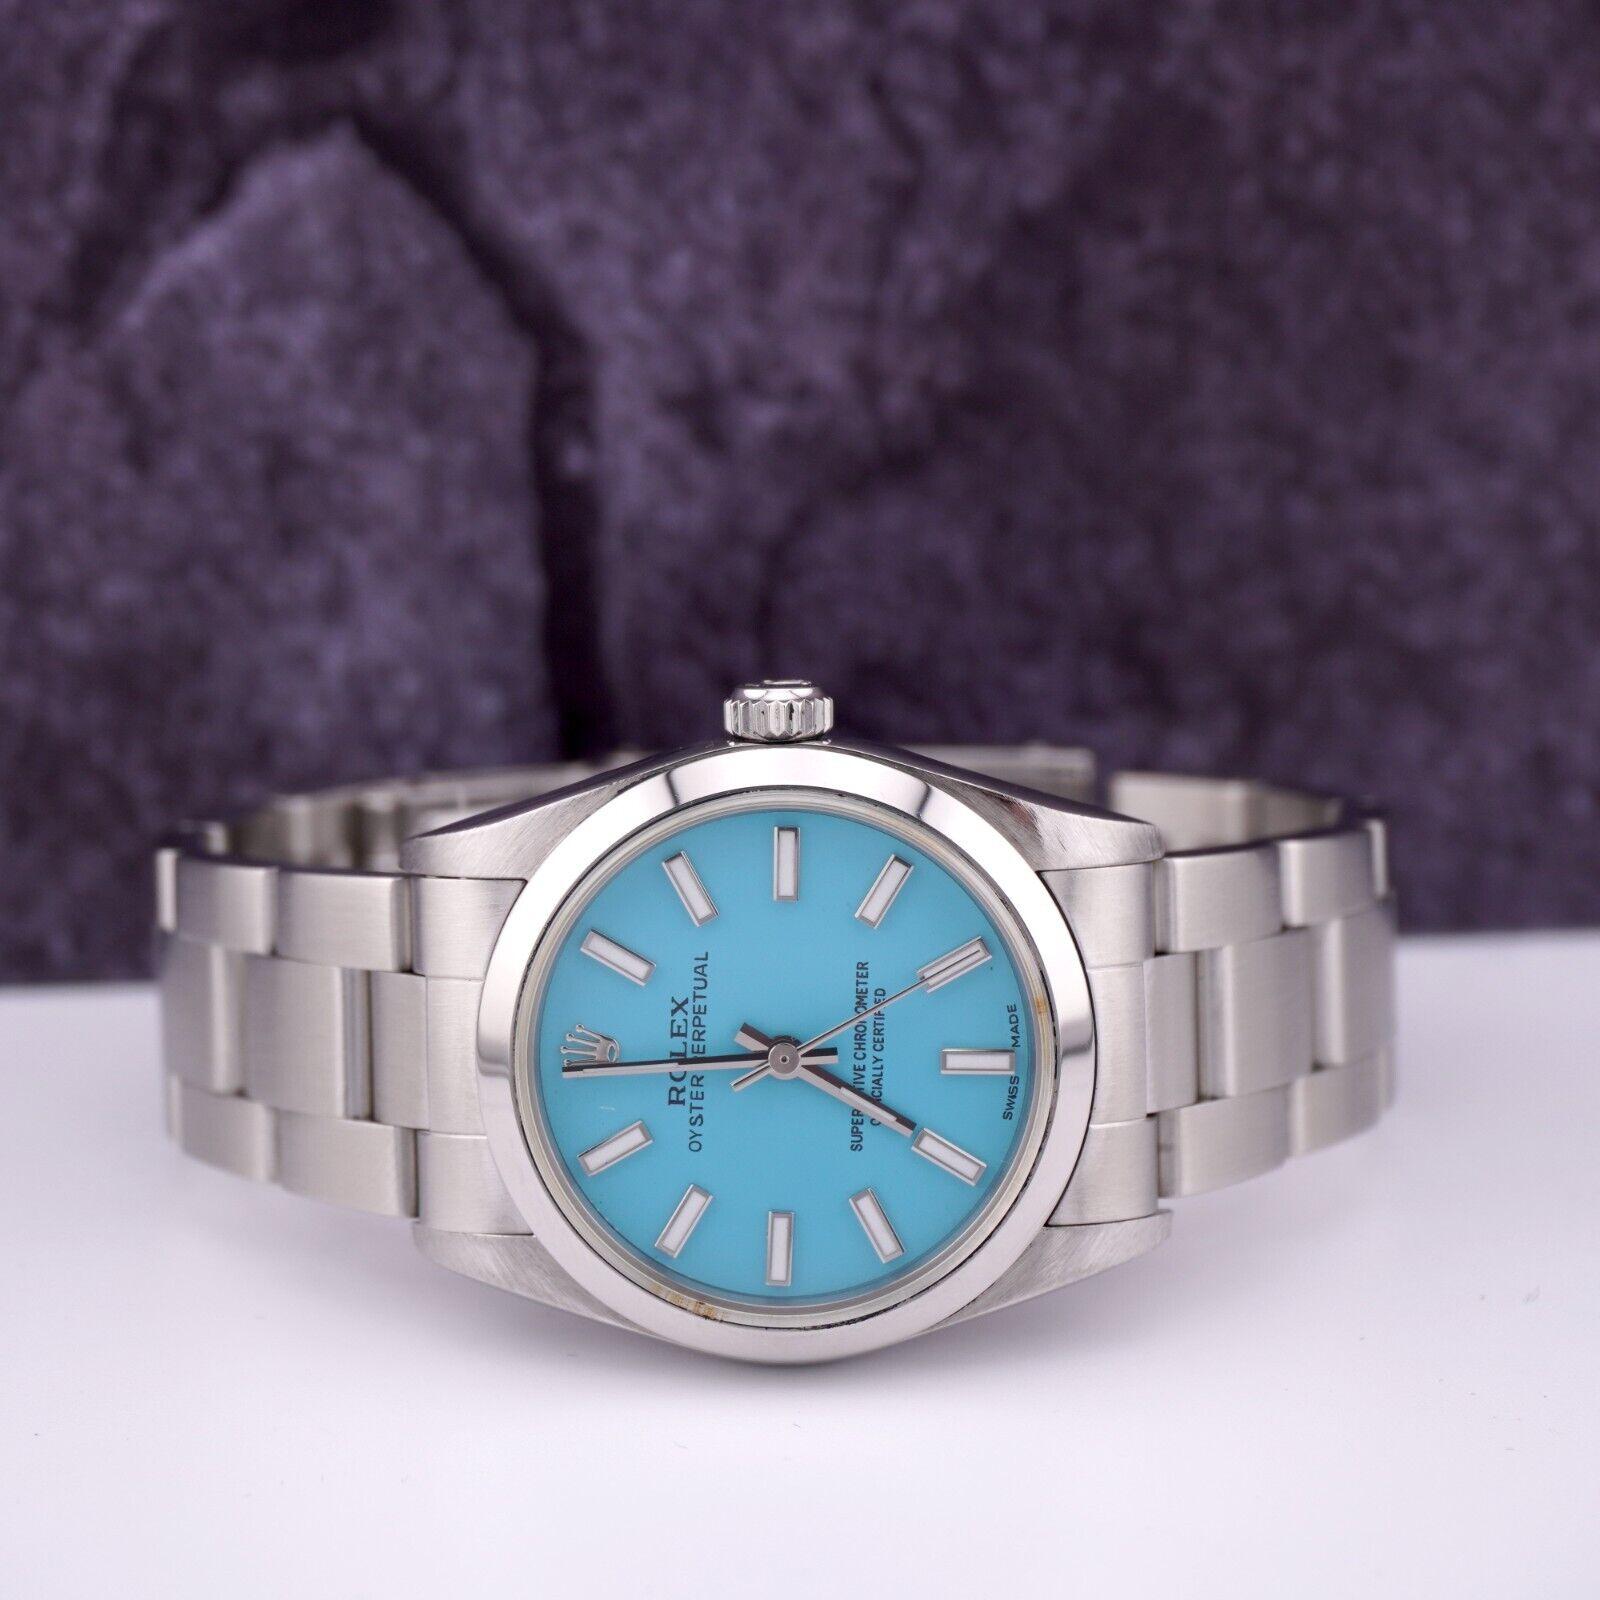 Rolex Oyster Perpetual 31mm Watch

Pre-owned w/ Gift Box
100% Authentic Authenticity Card
Condition - (Great Condition) - See Pics
Watch Reference - 77080
Model - Oyster Perpetual
Dial Color - Tiffany Blue
Material - Stainless Steel
Watch Will Fit